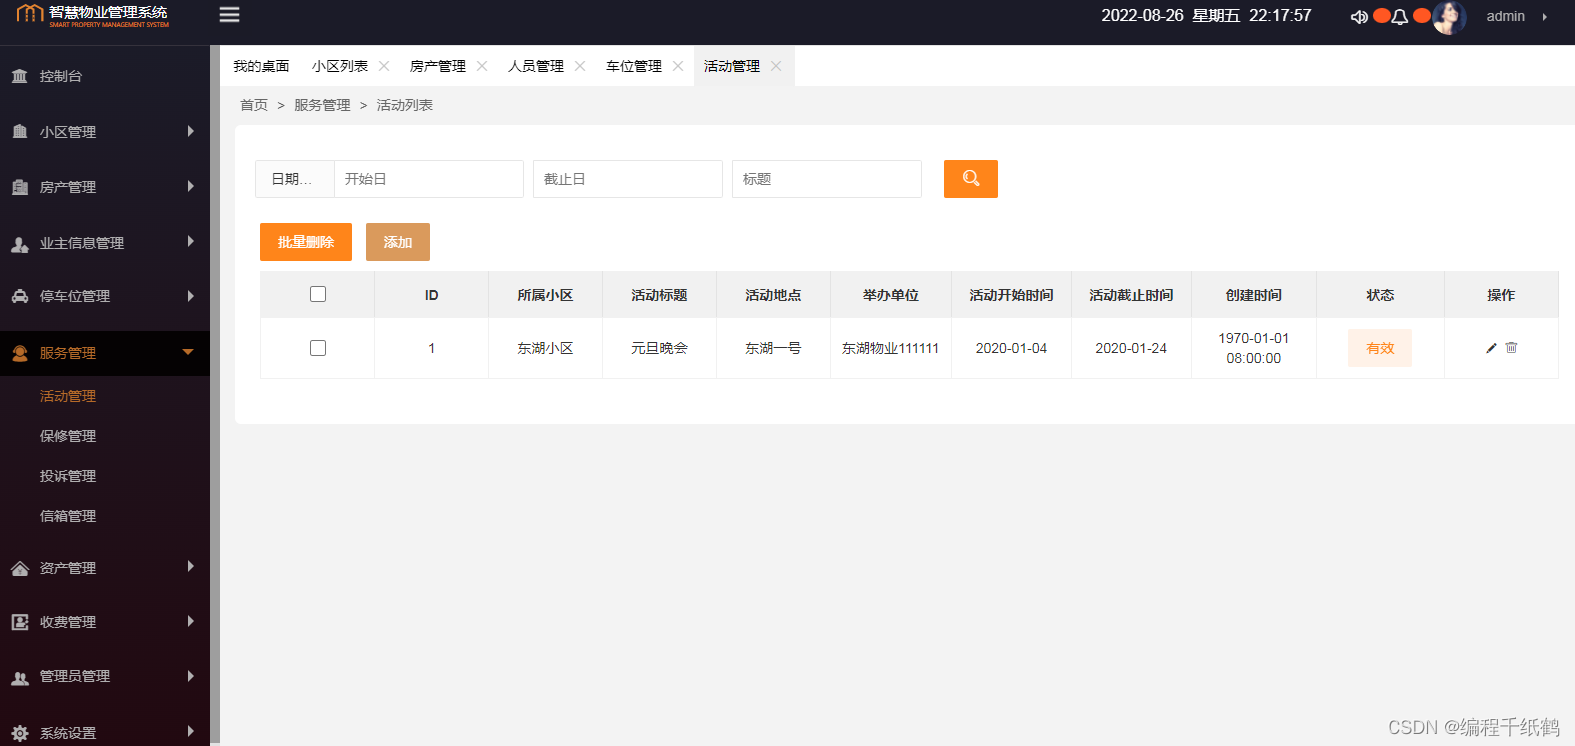 Springboot+Vue实现物业管理系统_spring boot_07